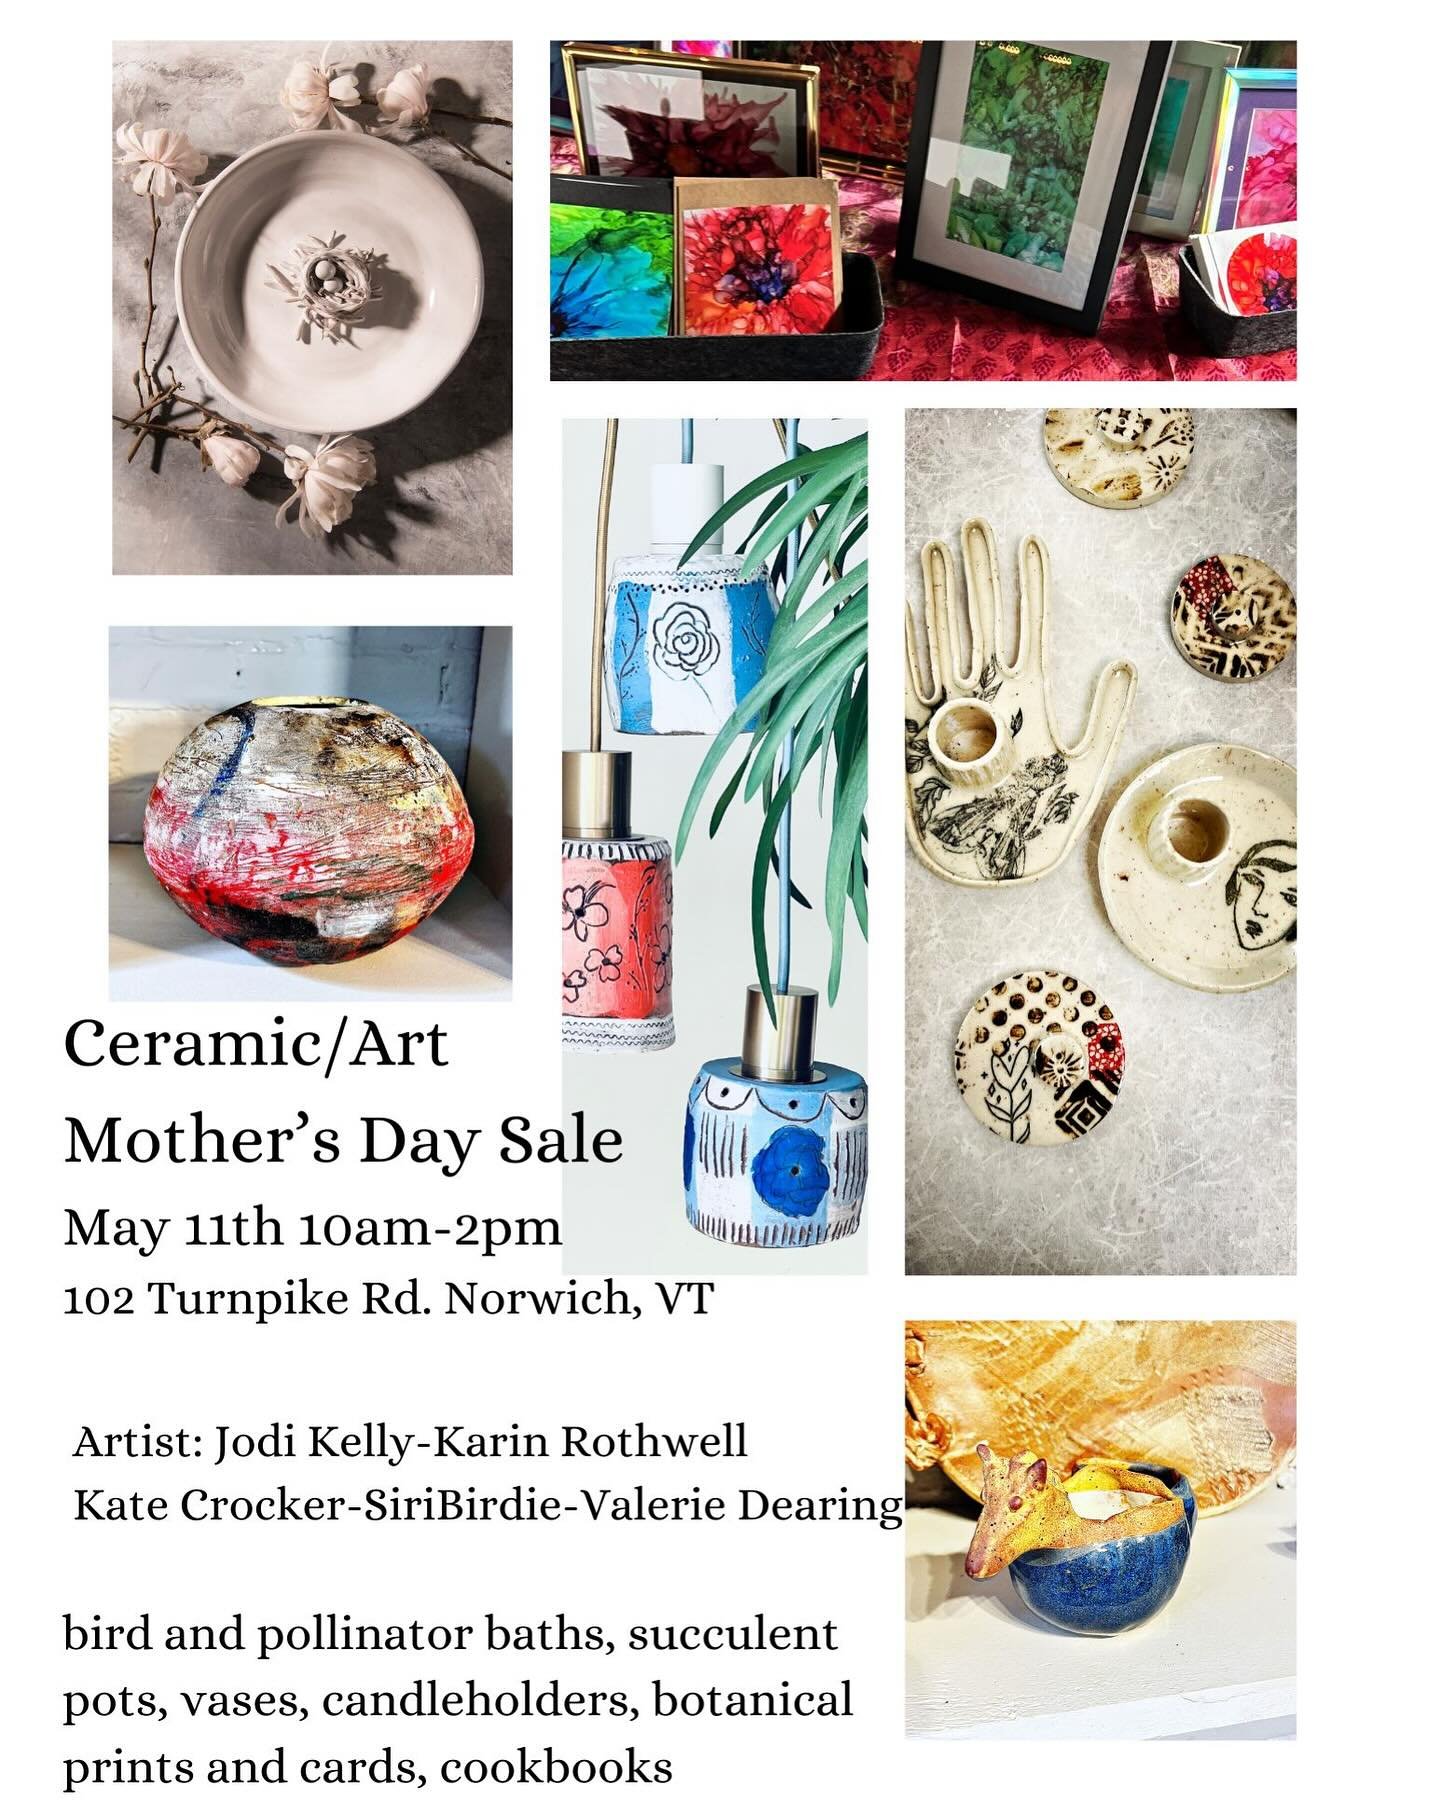 Stop by Saturday and find a special gift for your mom! #ceramicart #madeinvermont #vermontartist #vermontmade #gardeninglife #gardeners #clayart #mothersdaygift #starpuddingfarm